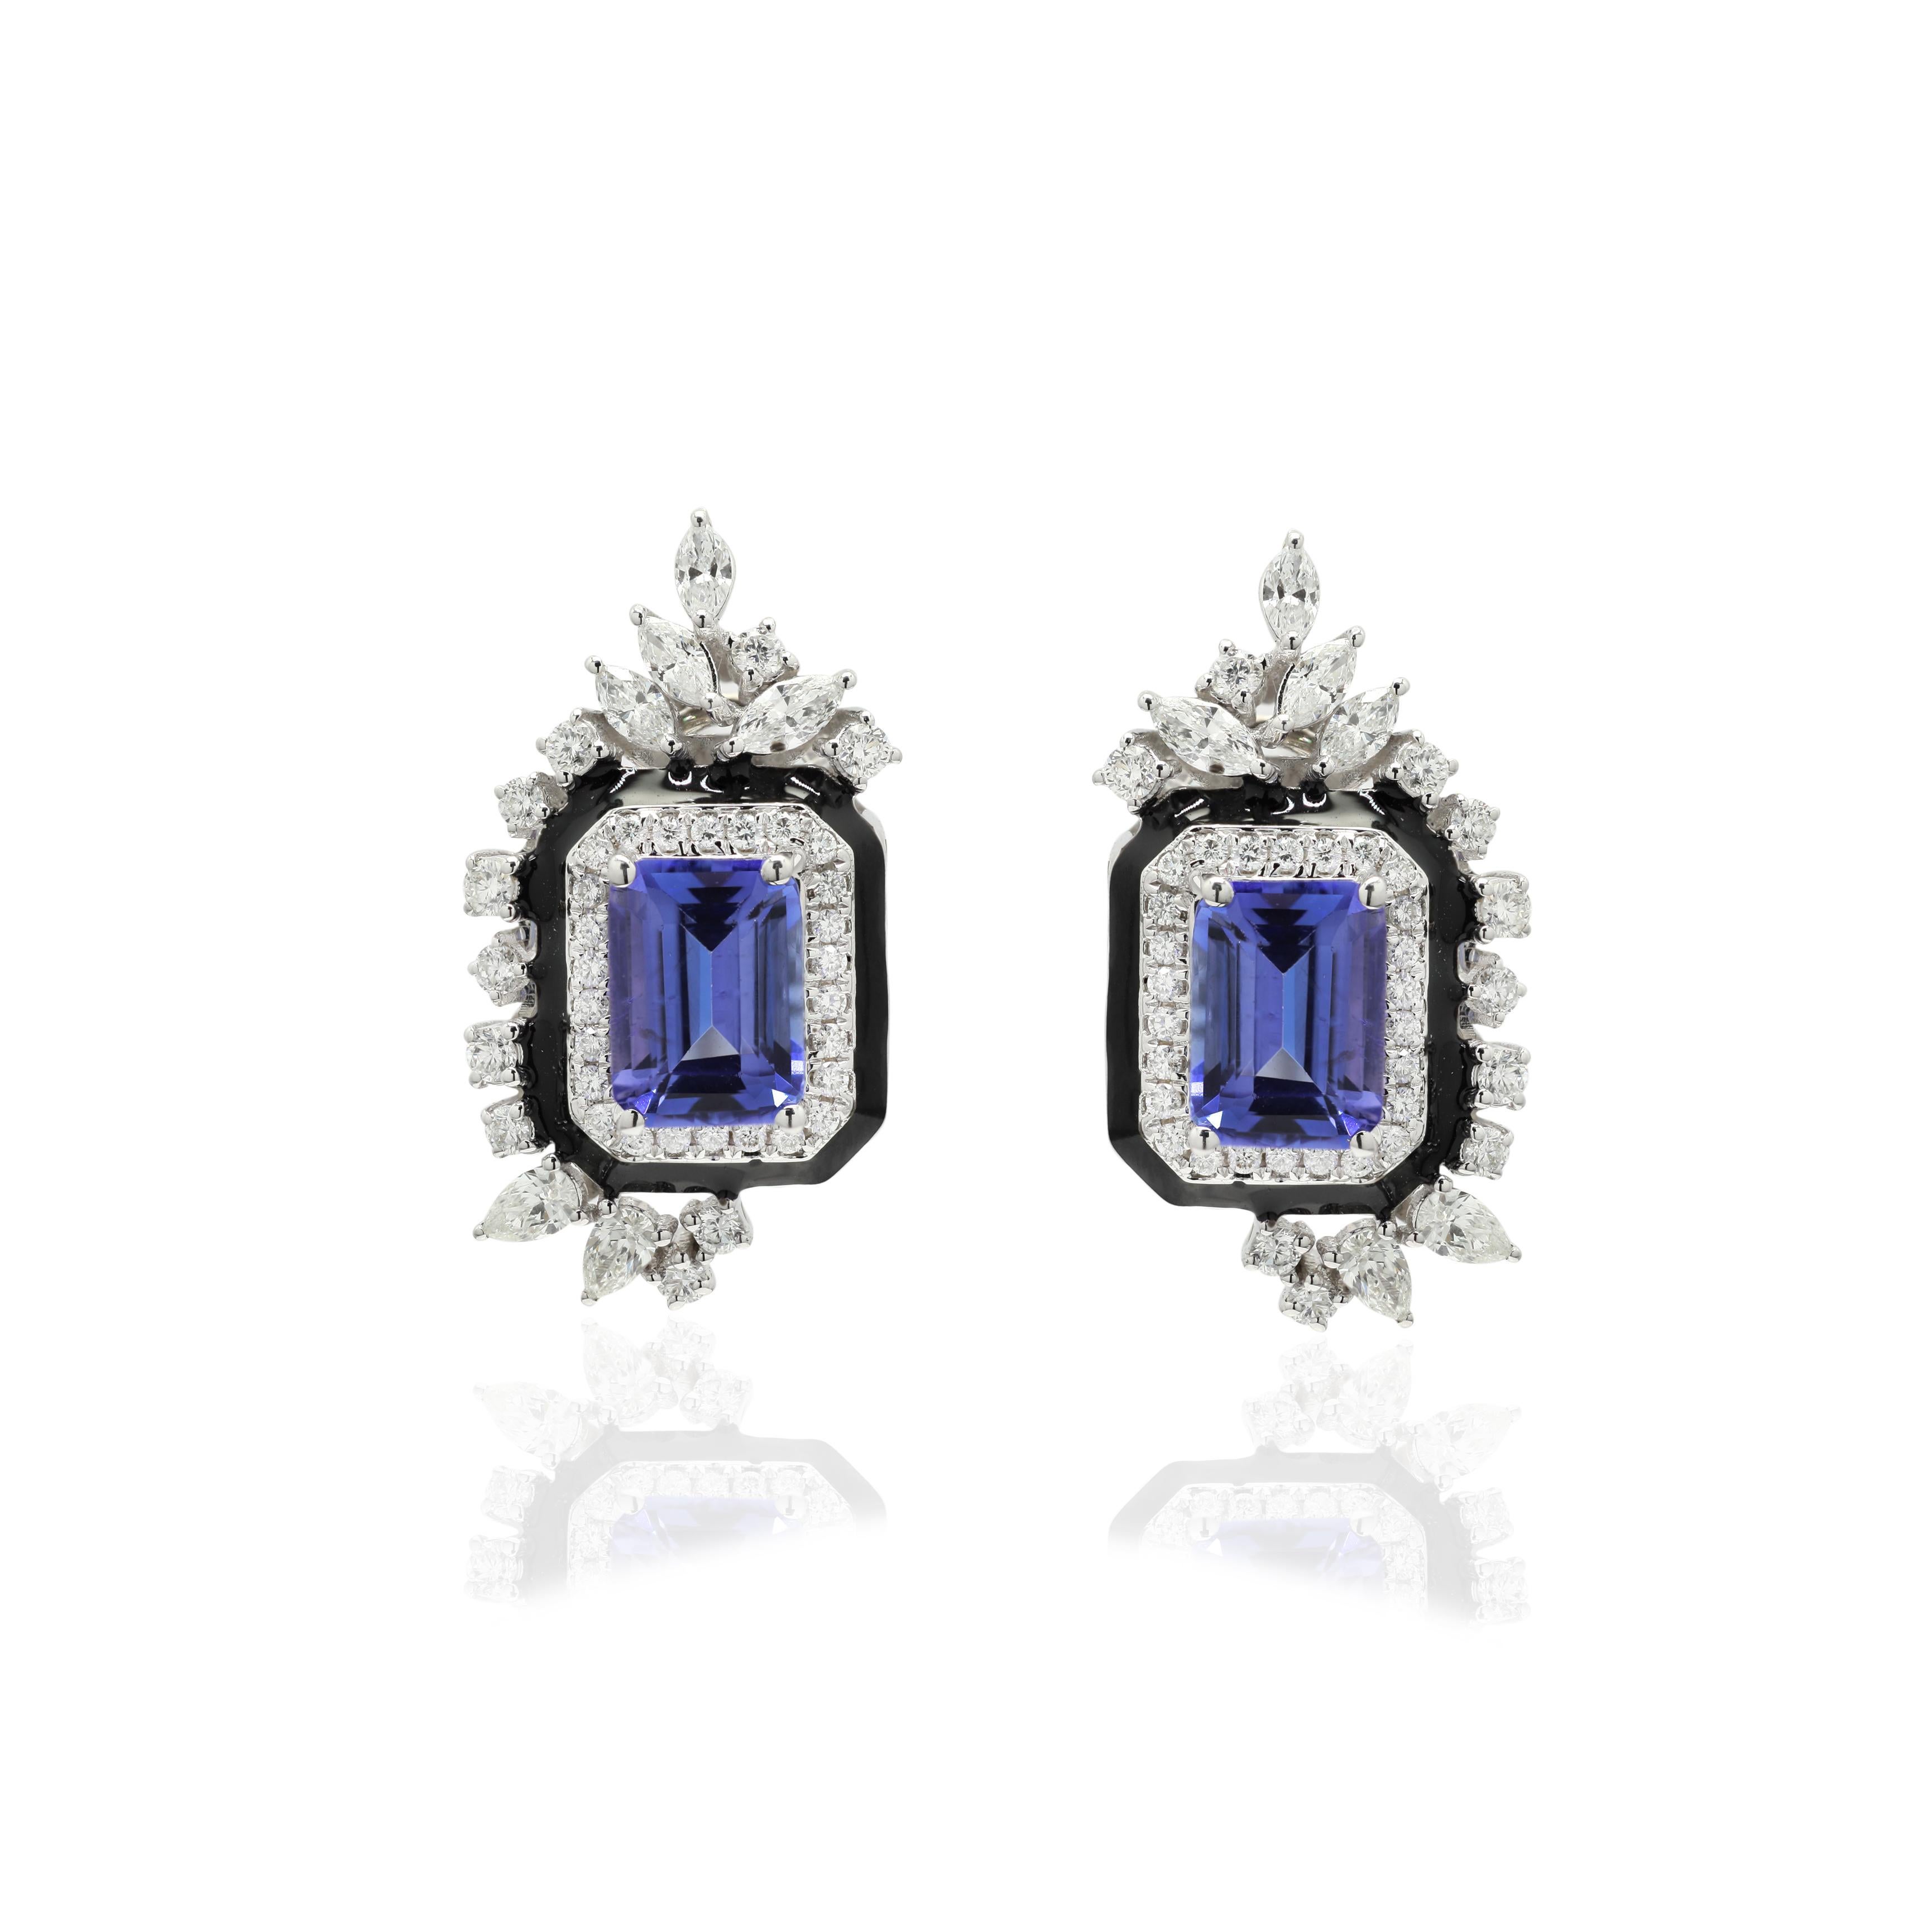 Art Deco 14K White Gold 3.12 ct Tanzanite Statement Stud Earrings Studded with Diamonds For Sale